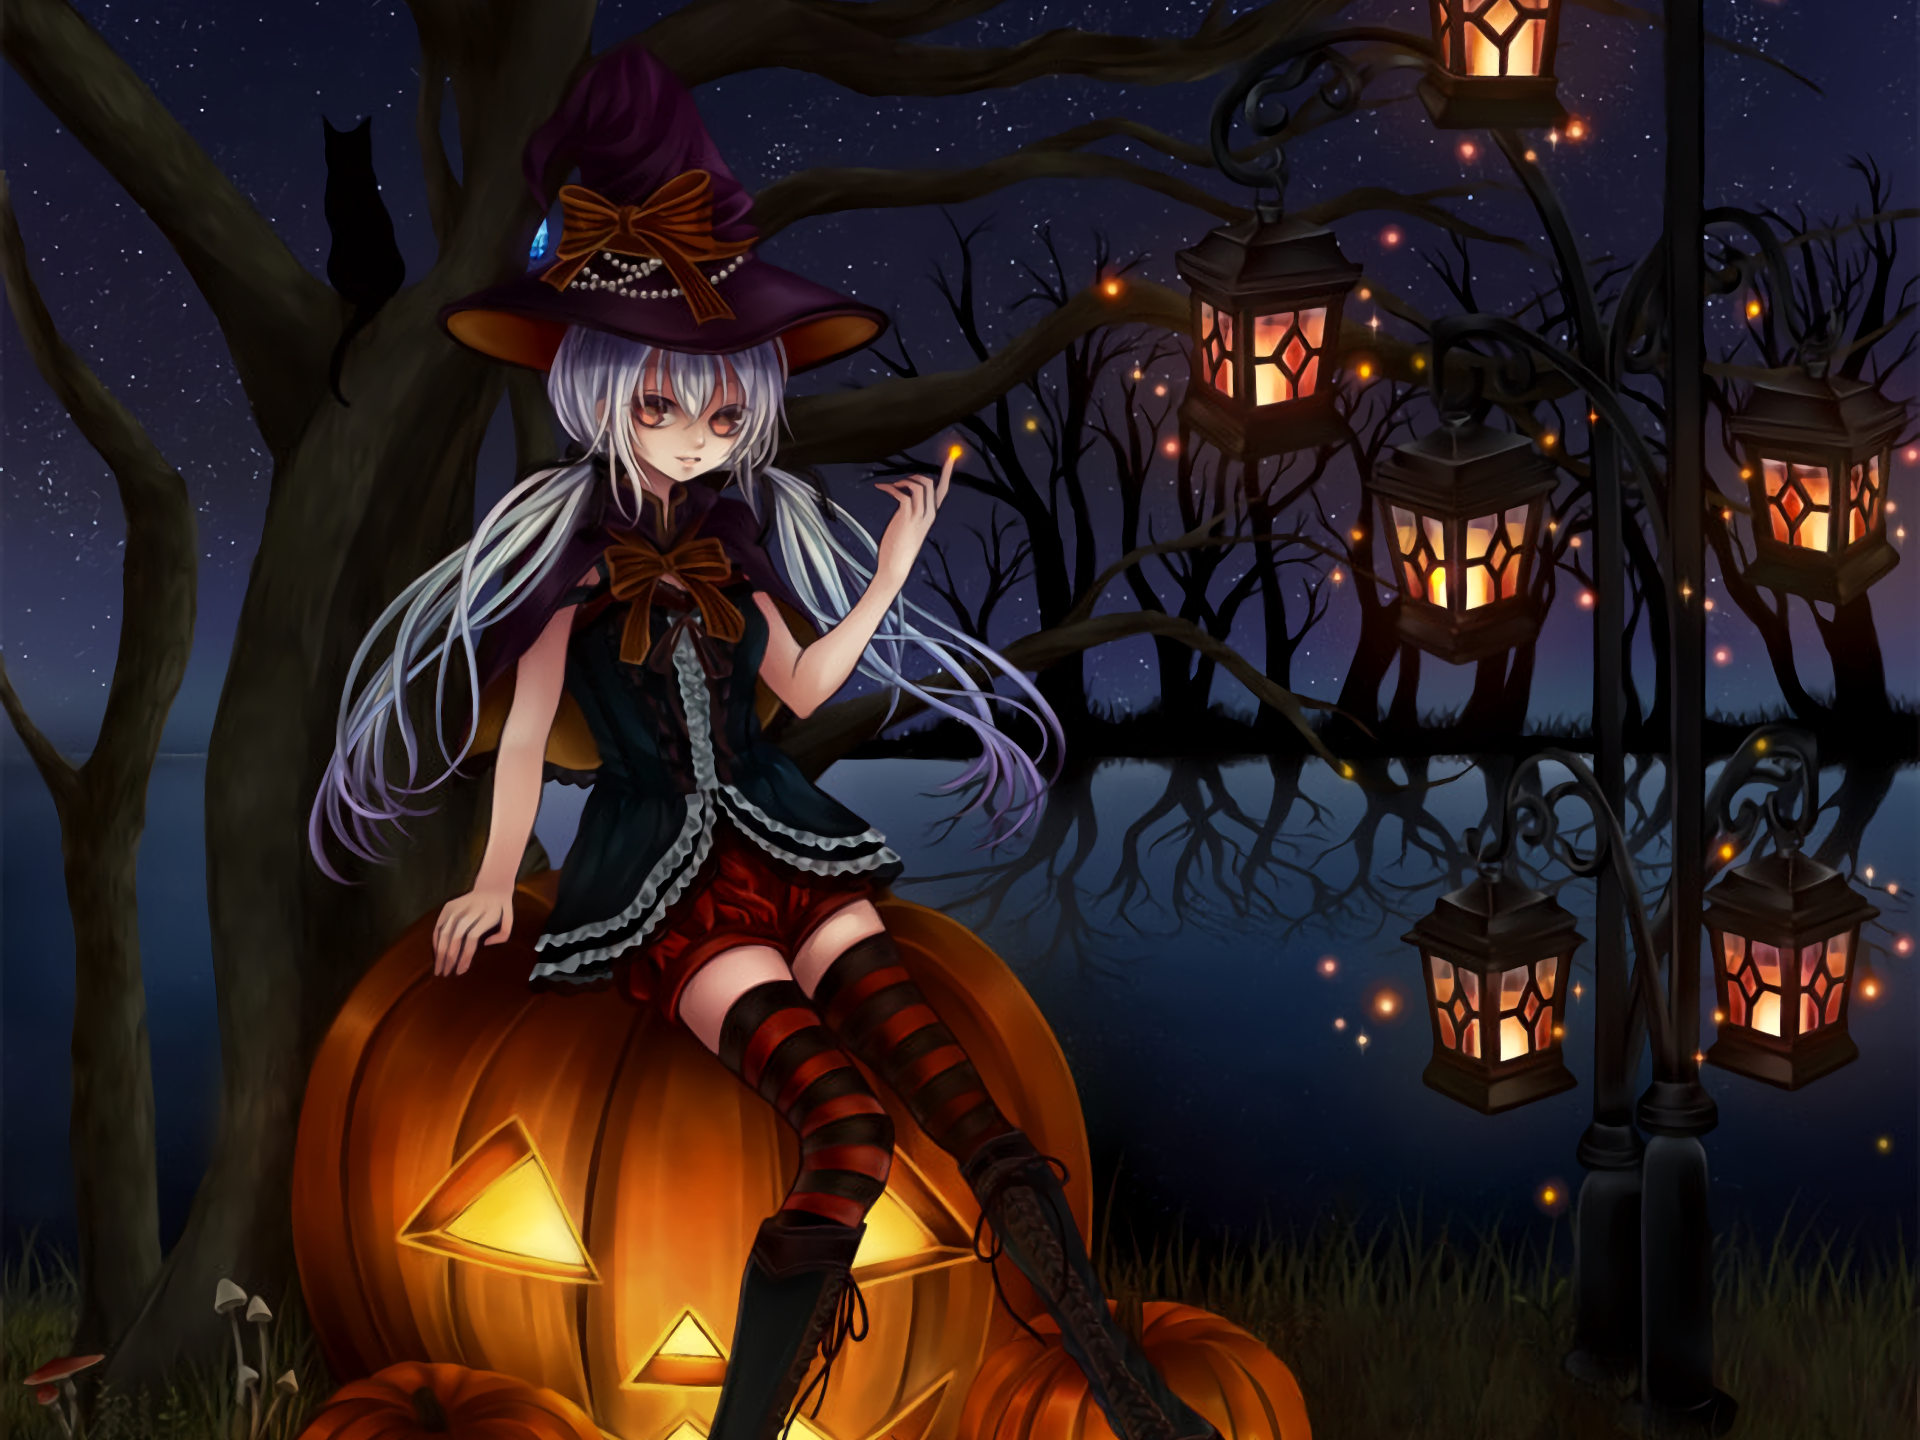 Your Majesty Halloween Night Hollows Event is Available Now - QooApp News